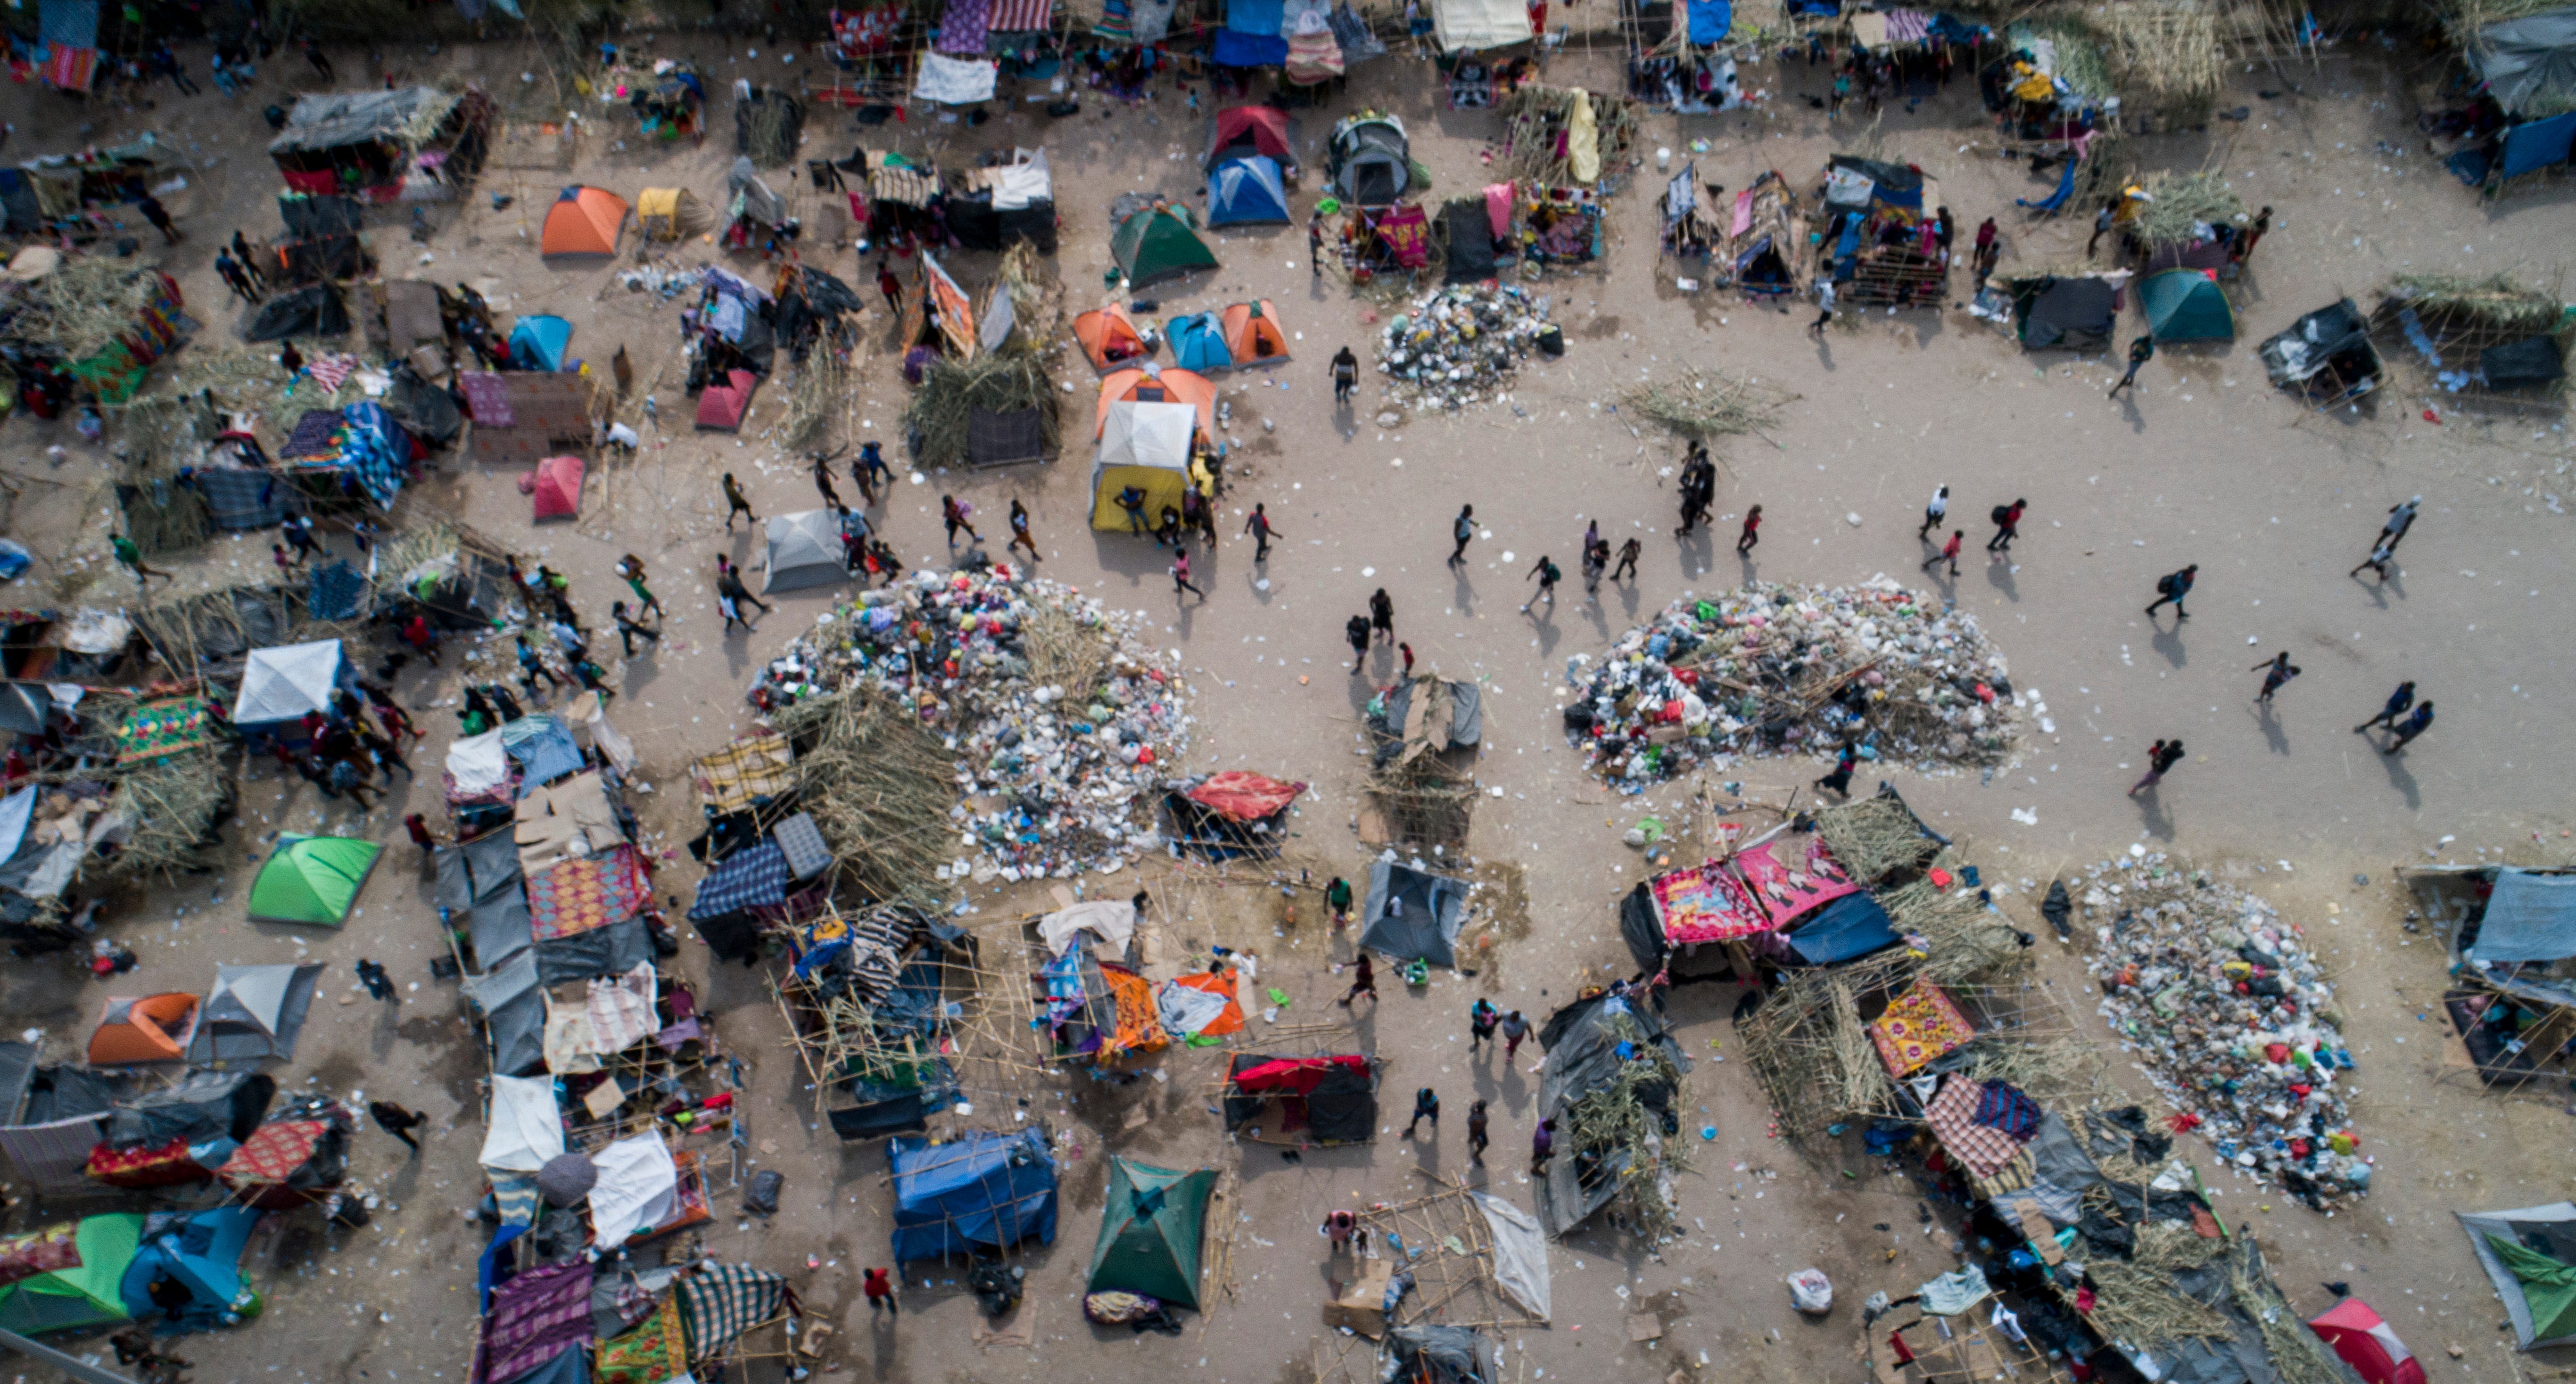 The migrant camp in Del Rio, Texas, thinned out as migrants returned to Mexico or were expelled by the U.S., as seen in these drone photos taken Tuesday, Sept. 21, 2021.